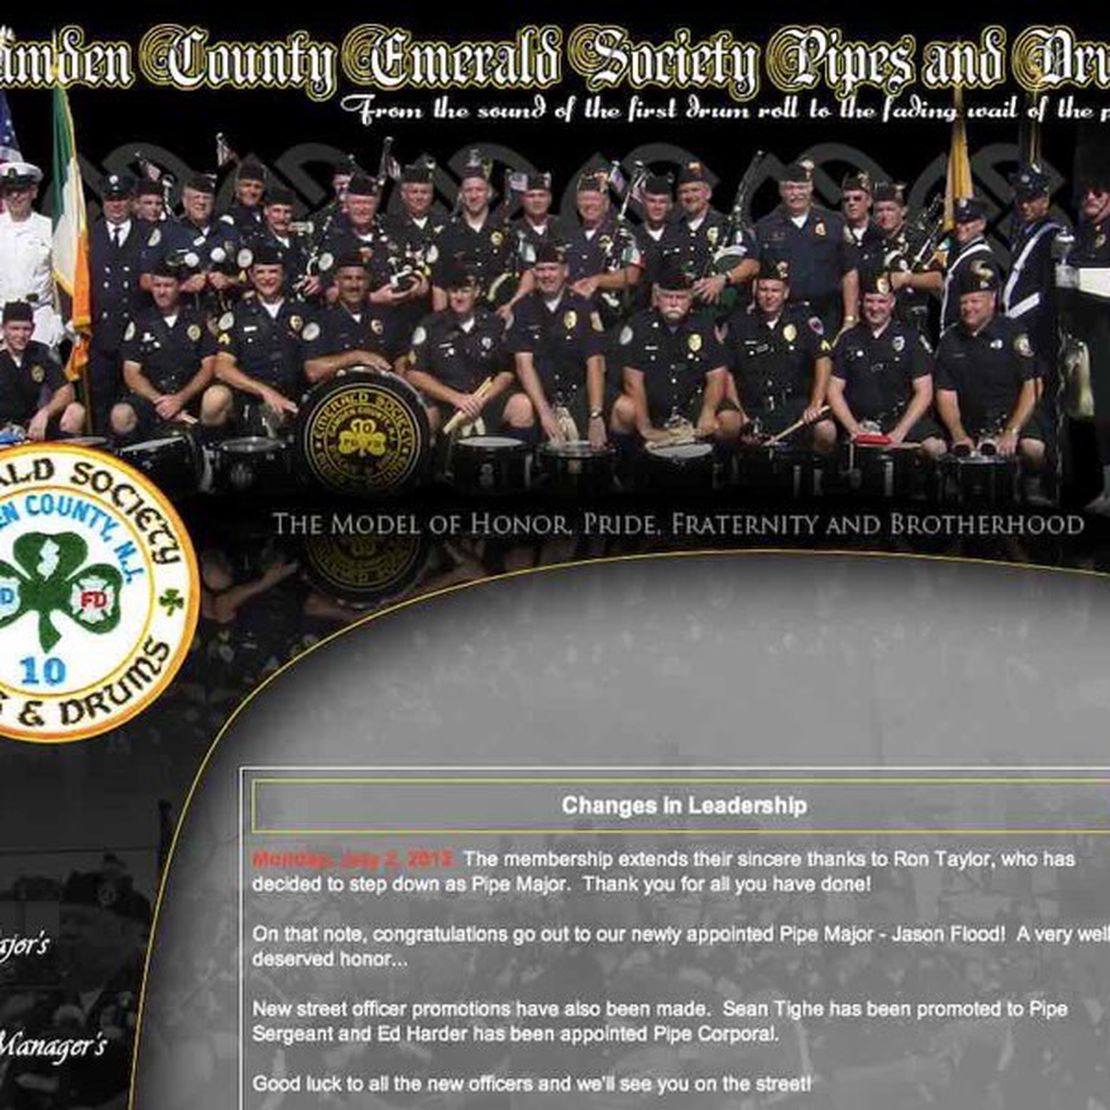 camden county emerald society pipes and drums